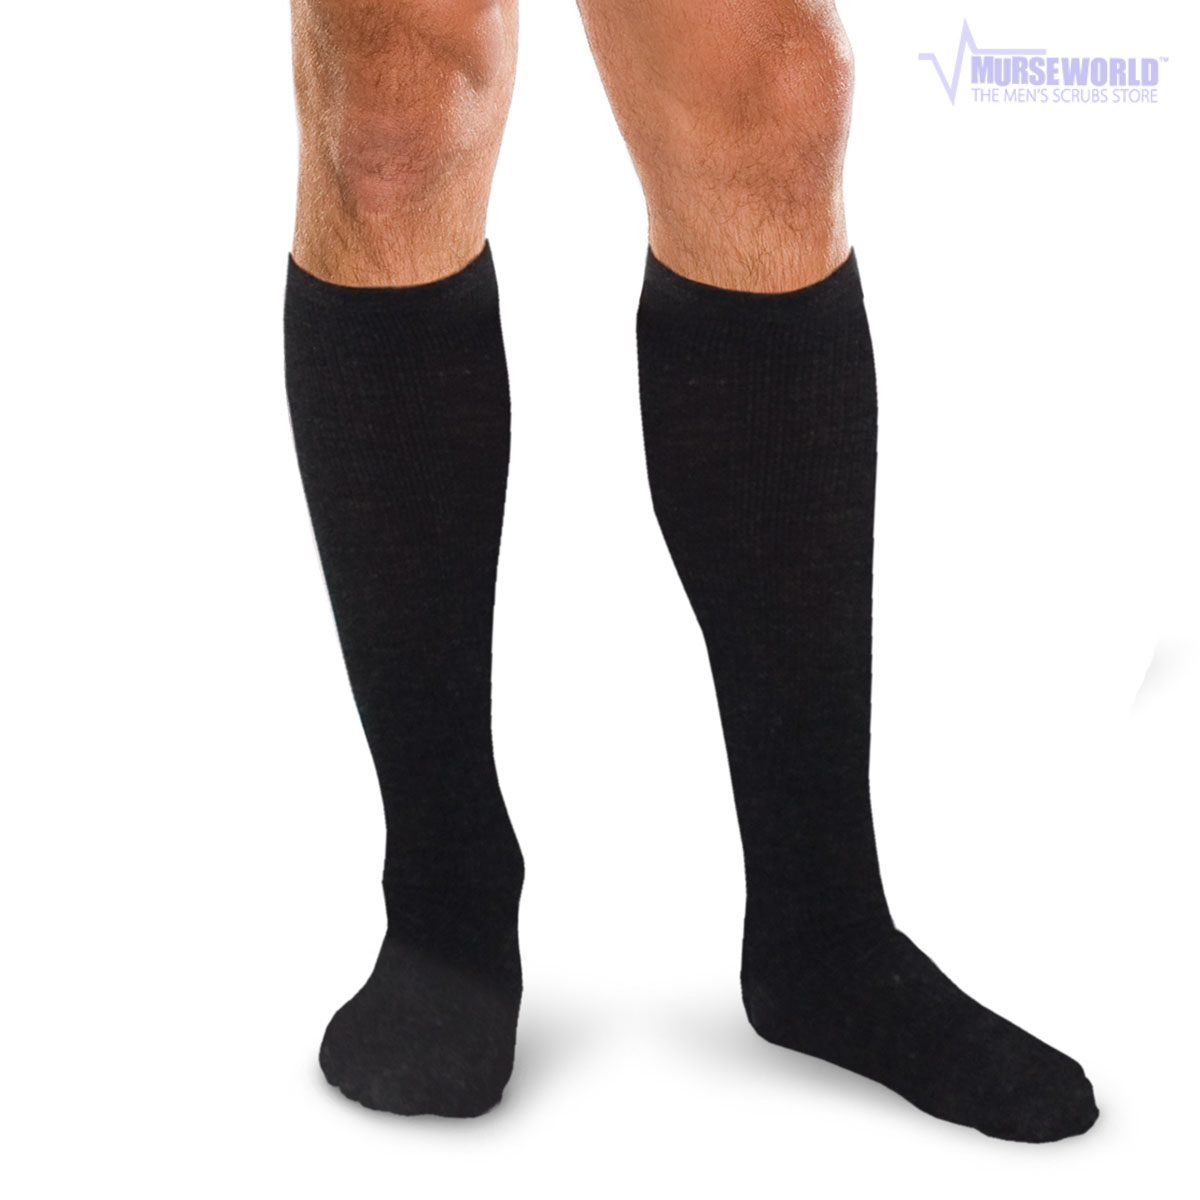 Therafirm Unisex 10-15Hg Light Support Compression Sock - TFCS167/TFCS161 (One Pair)